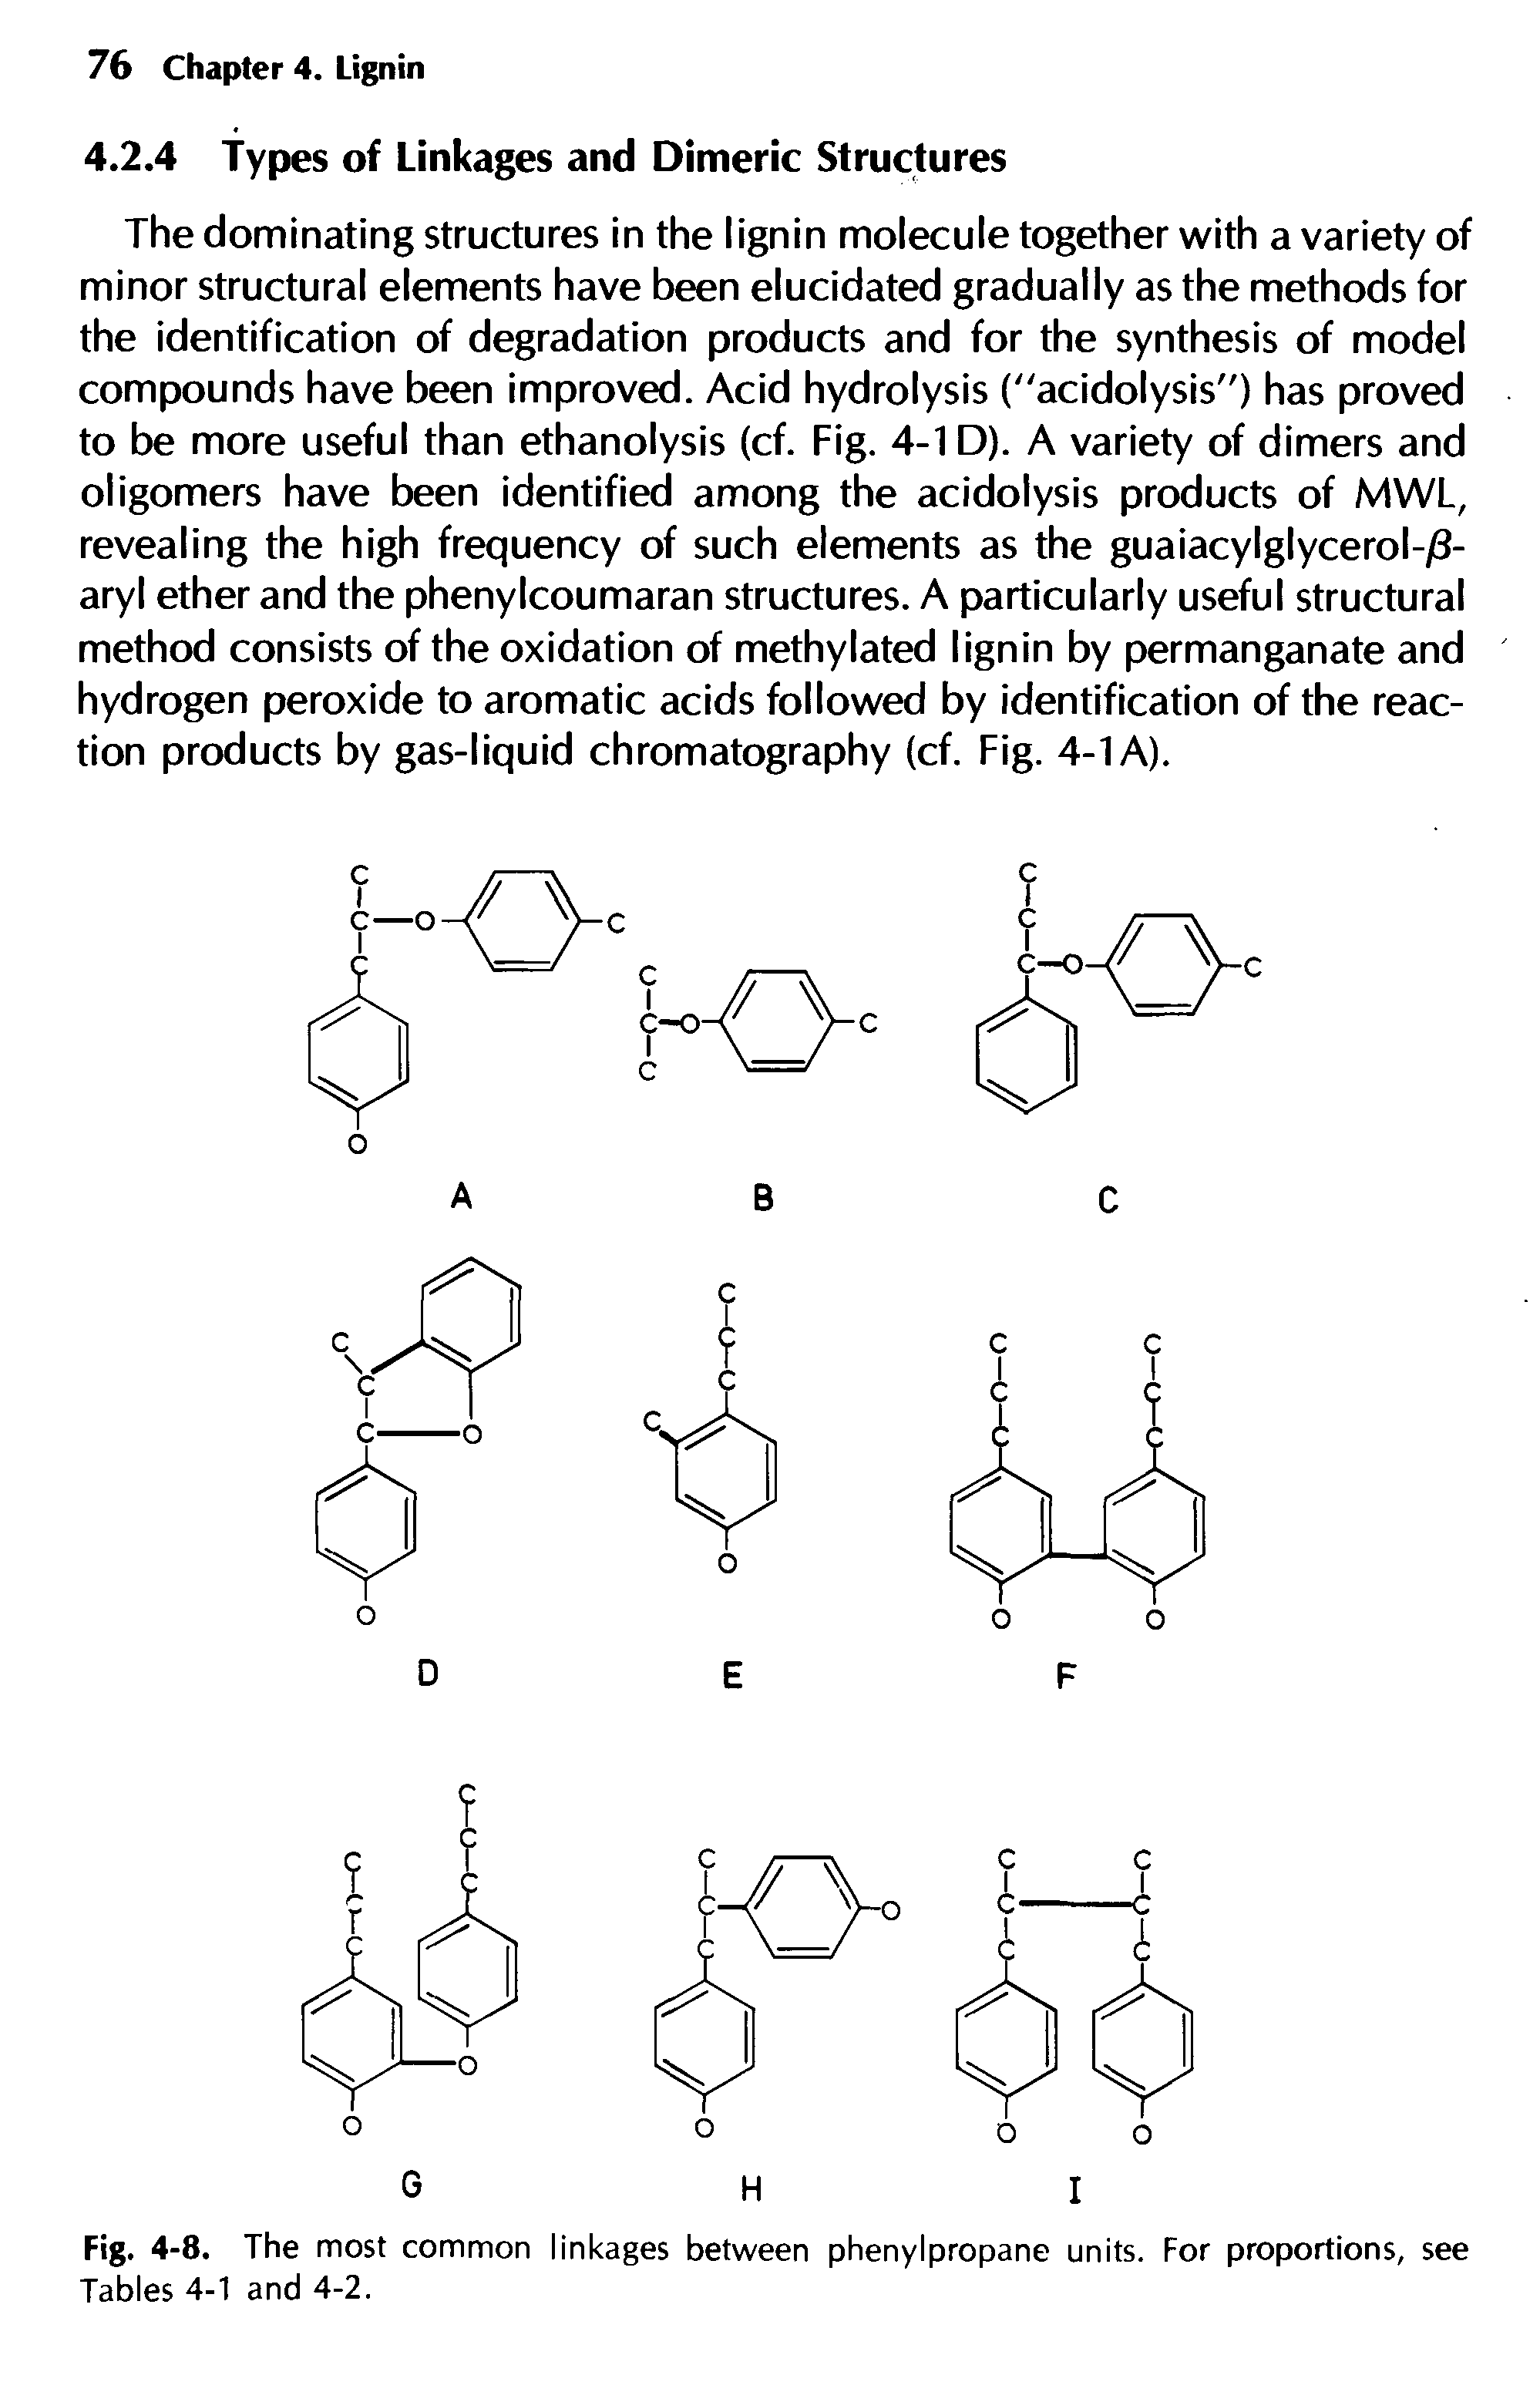 Fig. 4-8. The most common linkages between phenylpropane units. For proportions, see Tables 4-1 and 4-2.